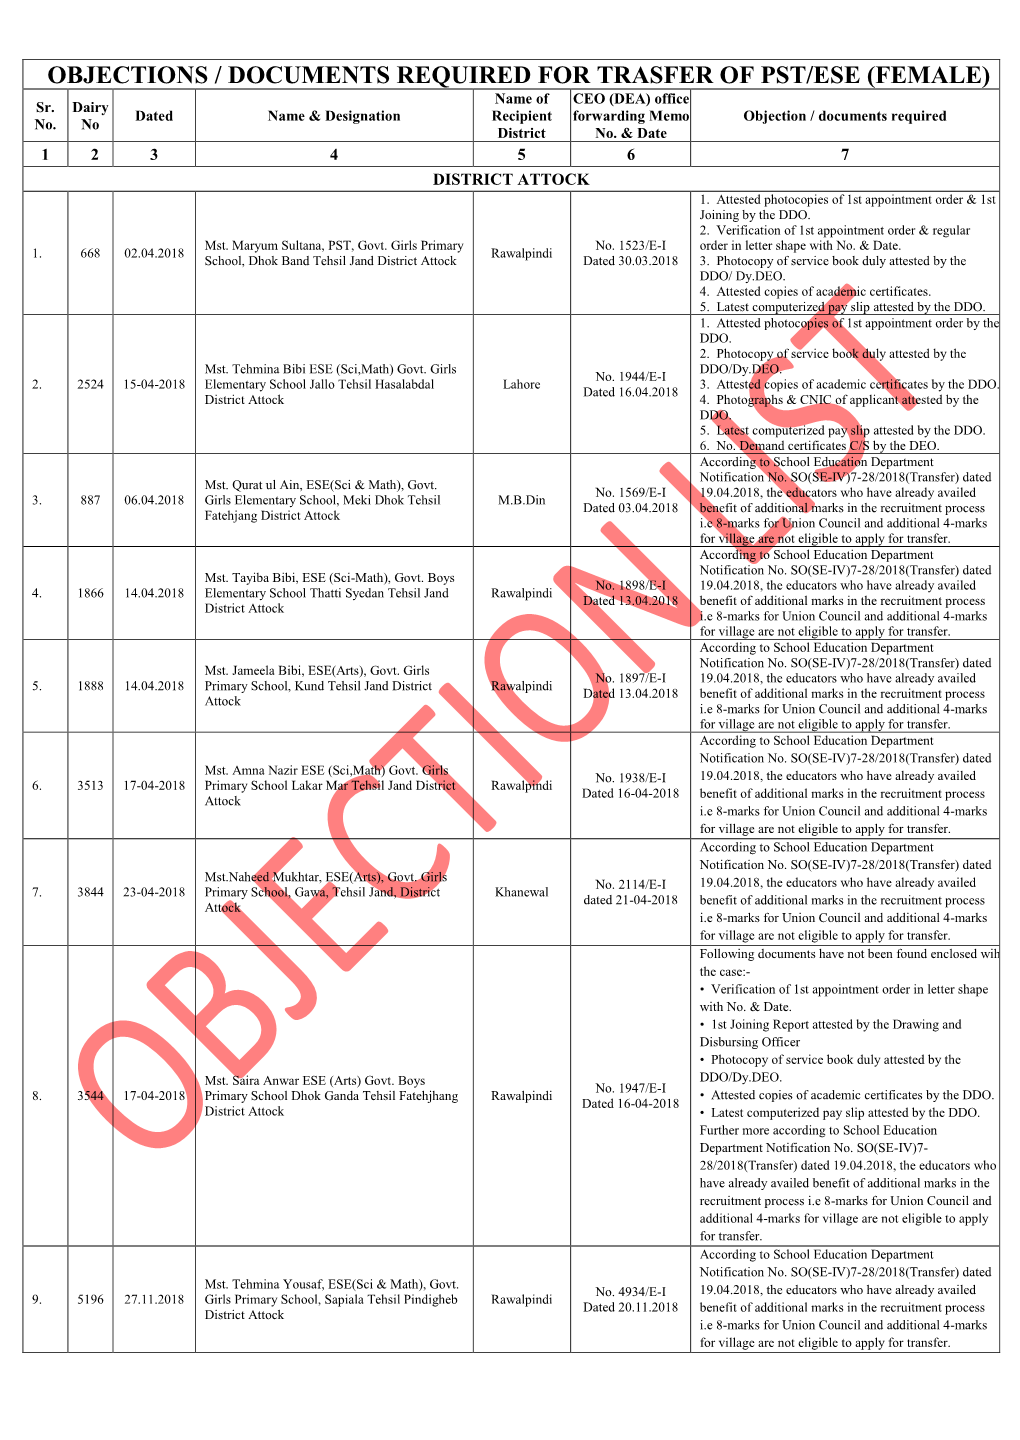 OBJECTIONS / DOCUMENTS REQUIRED for TRASFER of PST/ESE (FEMALE) Name of CEO (DEA) Office Sr